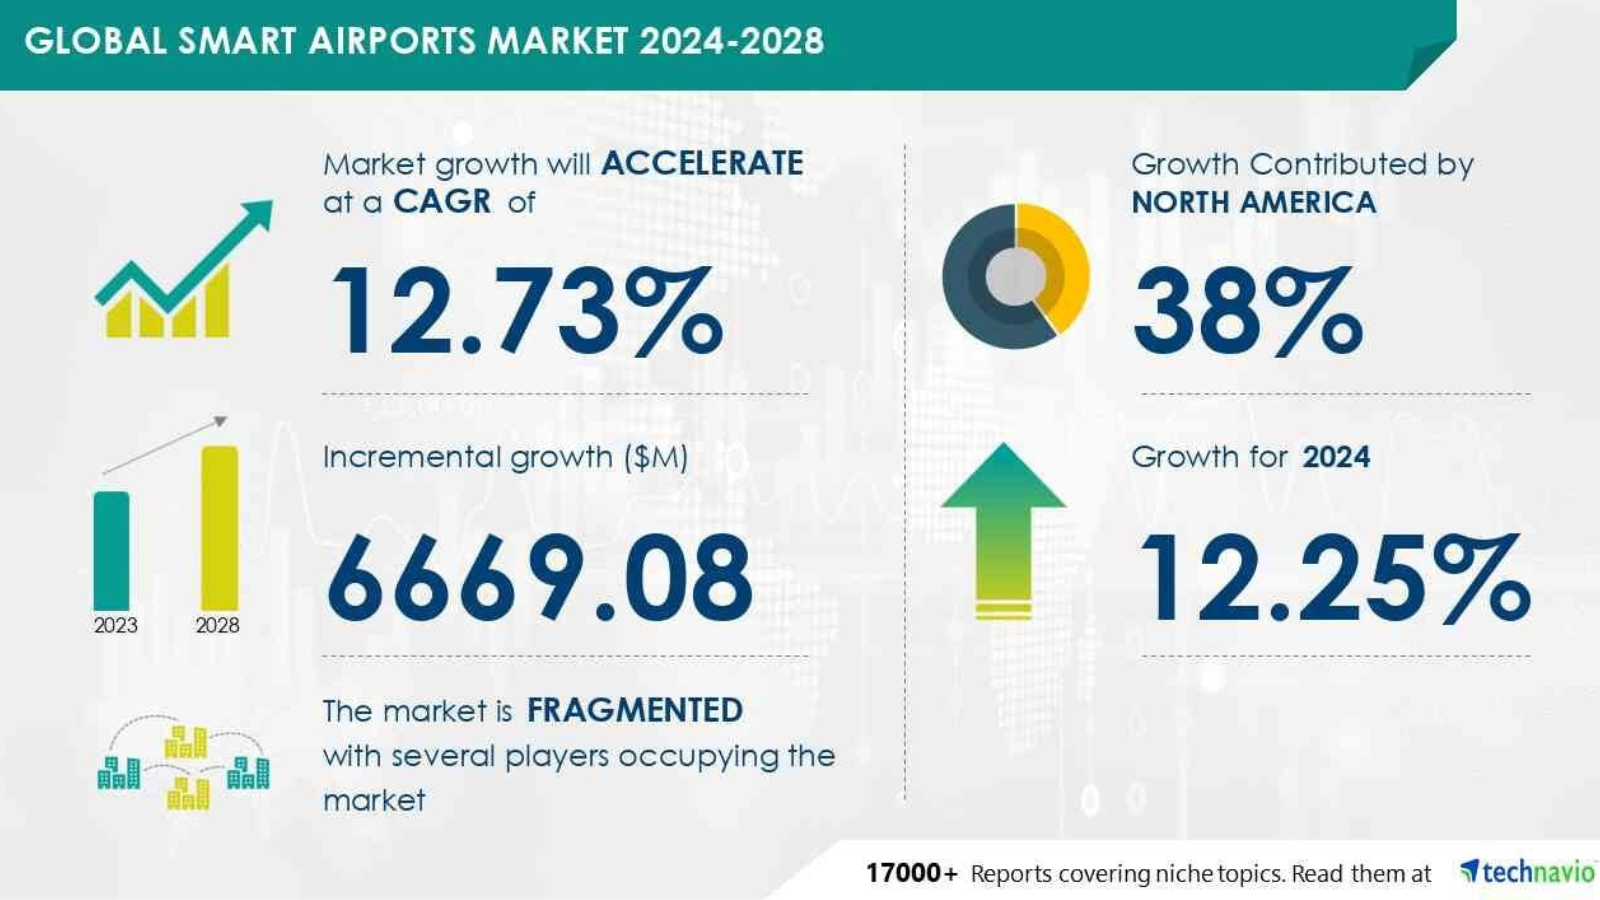 Global Smart Airports Market 2024-2028